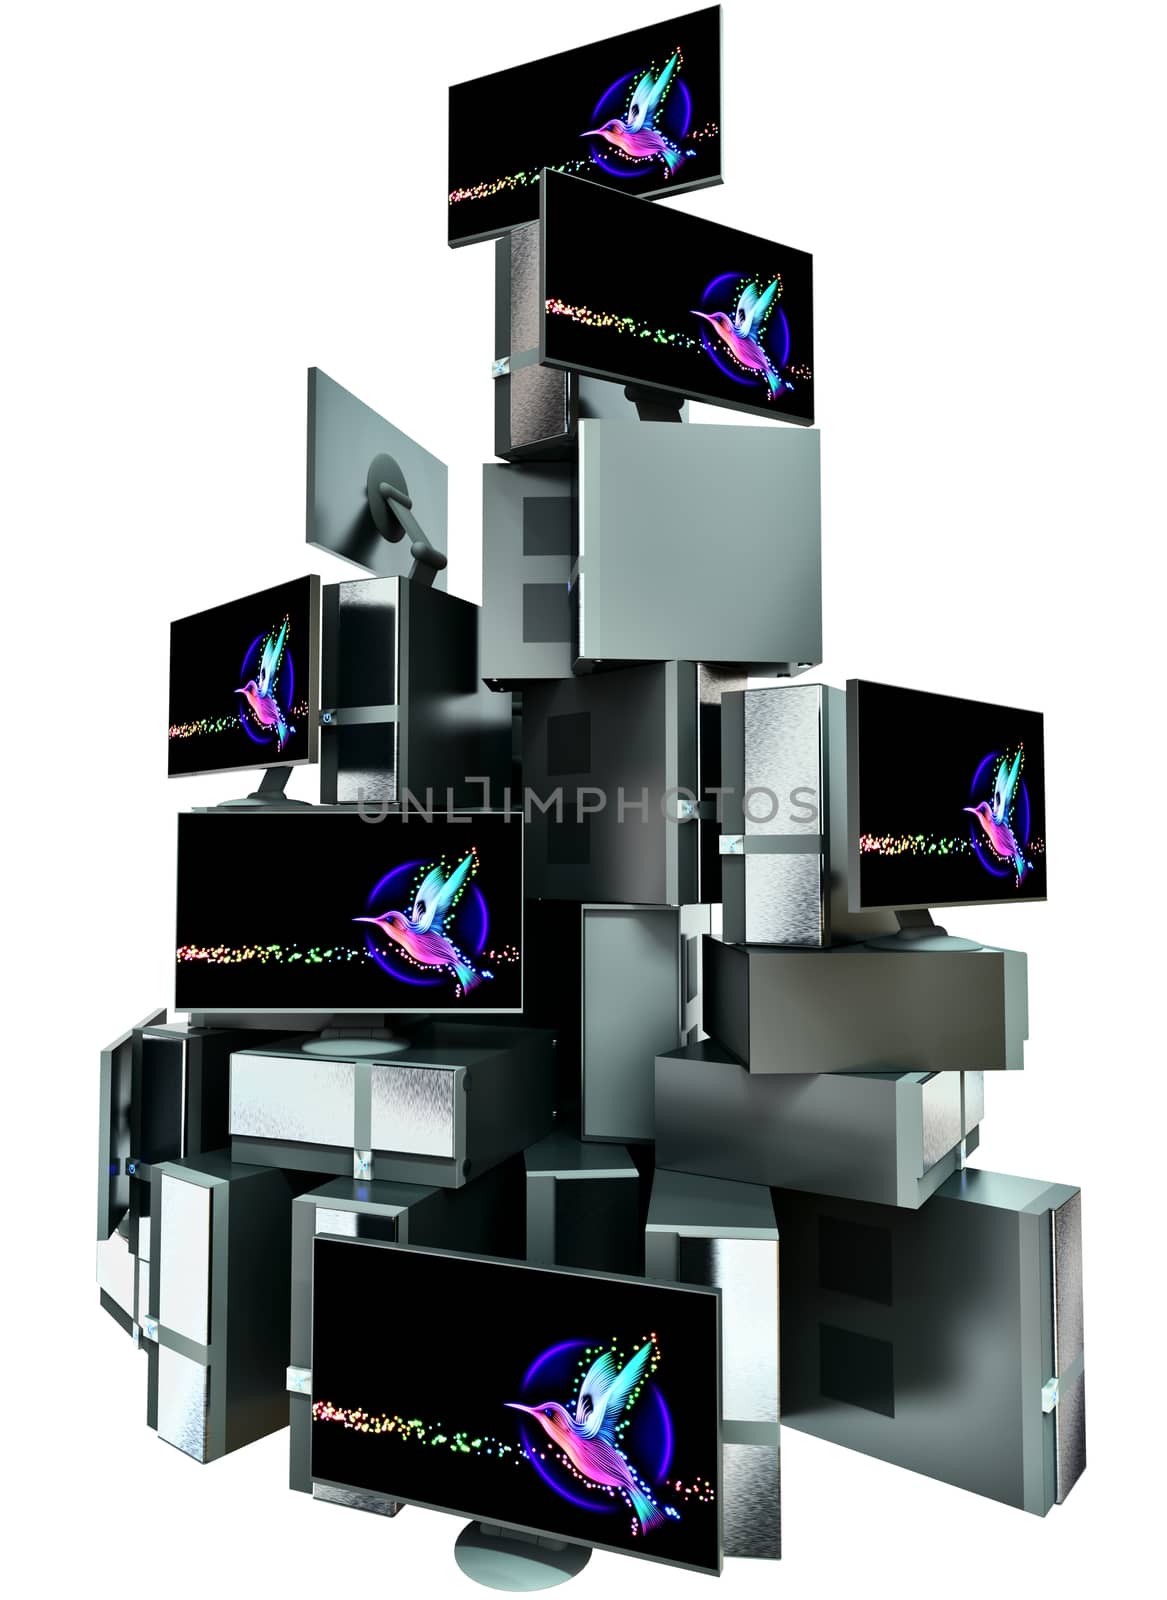 pyramid as set of multiple computers by merzavka